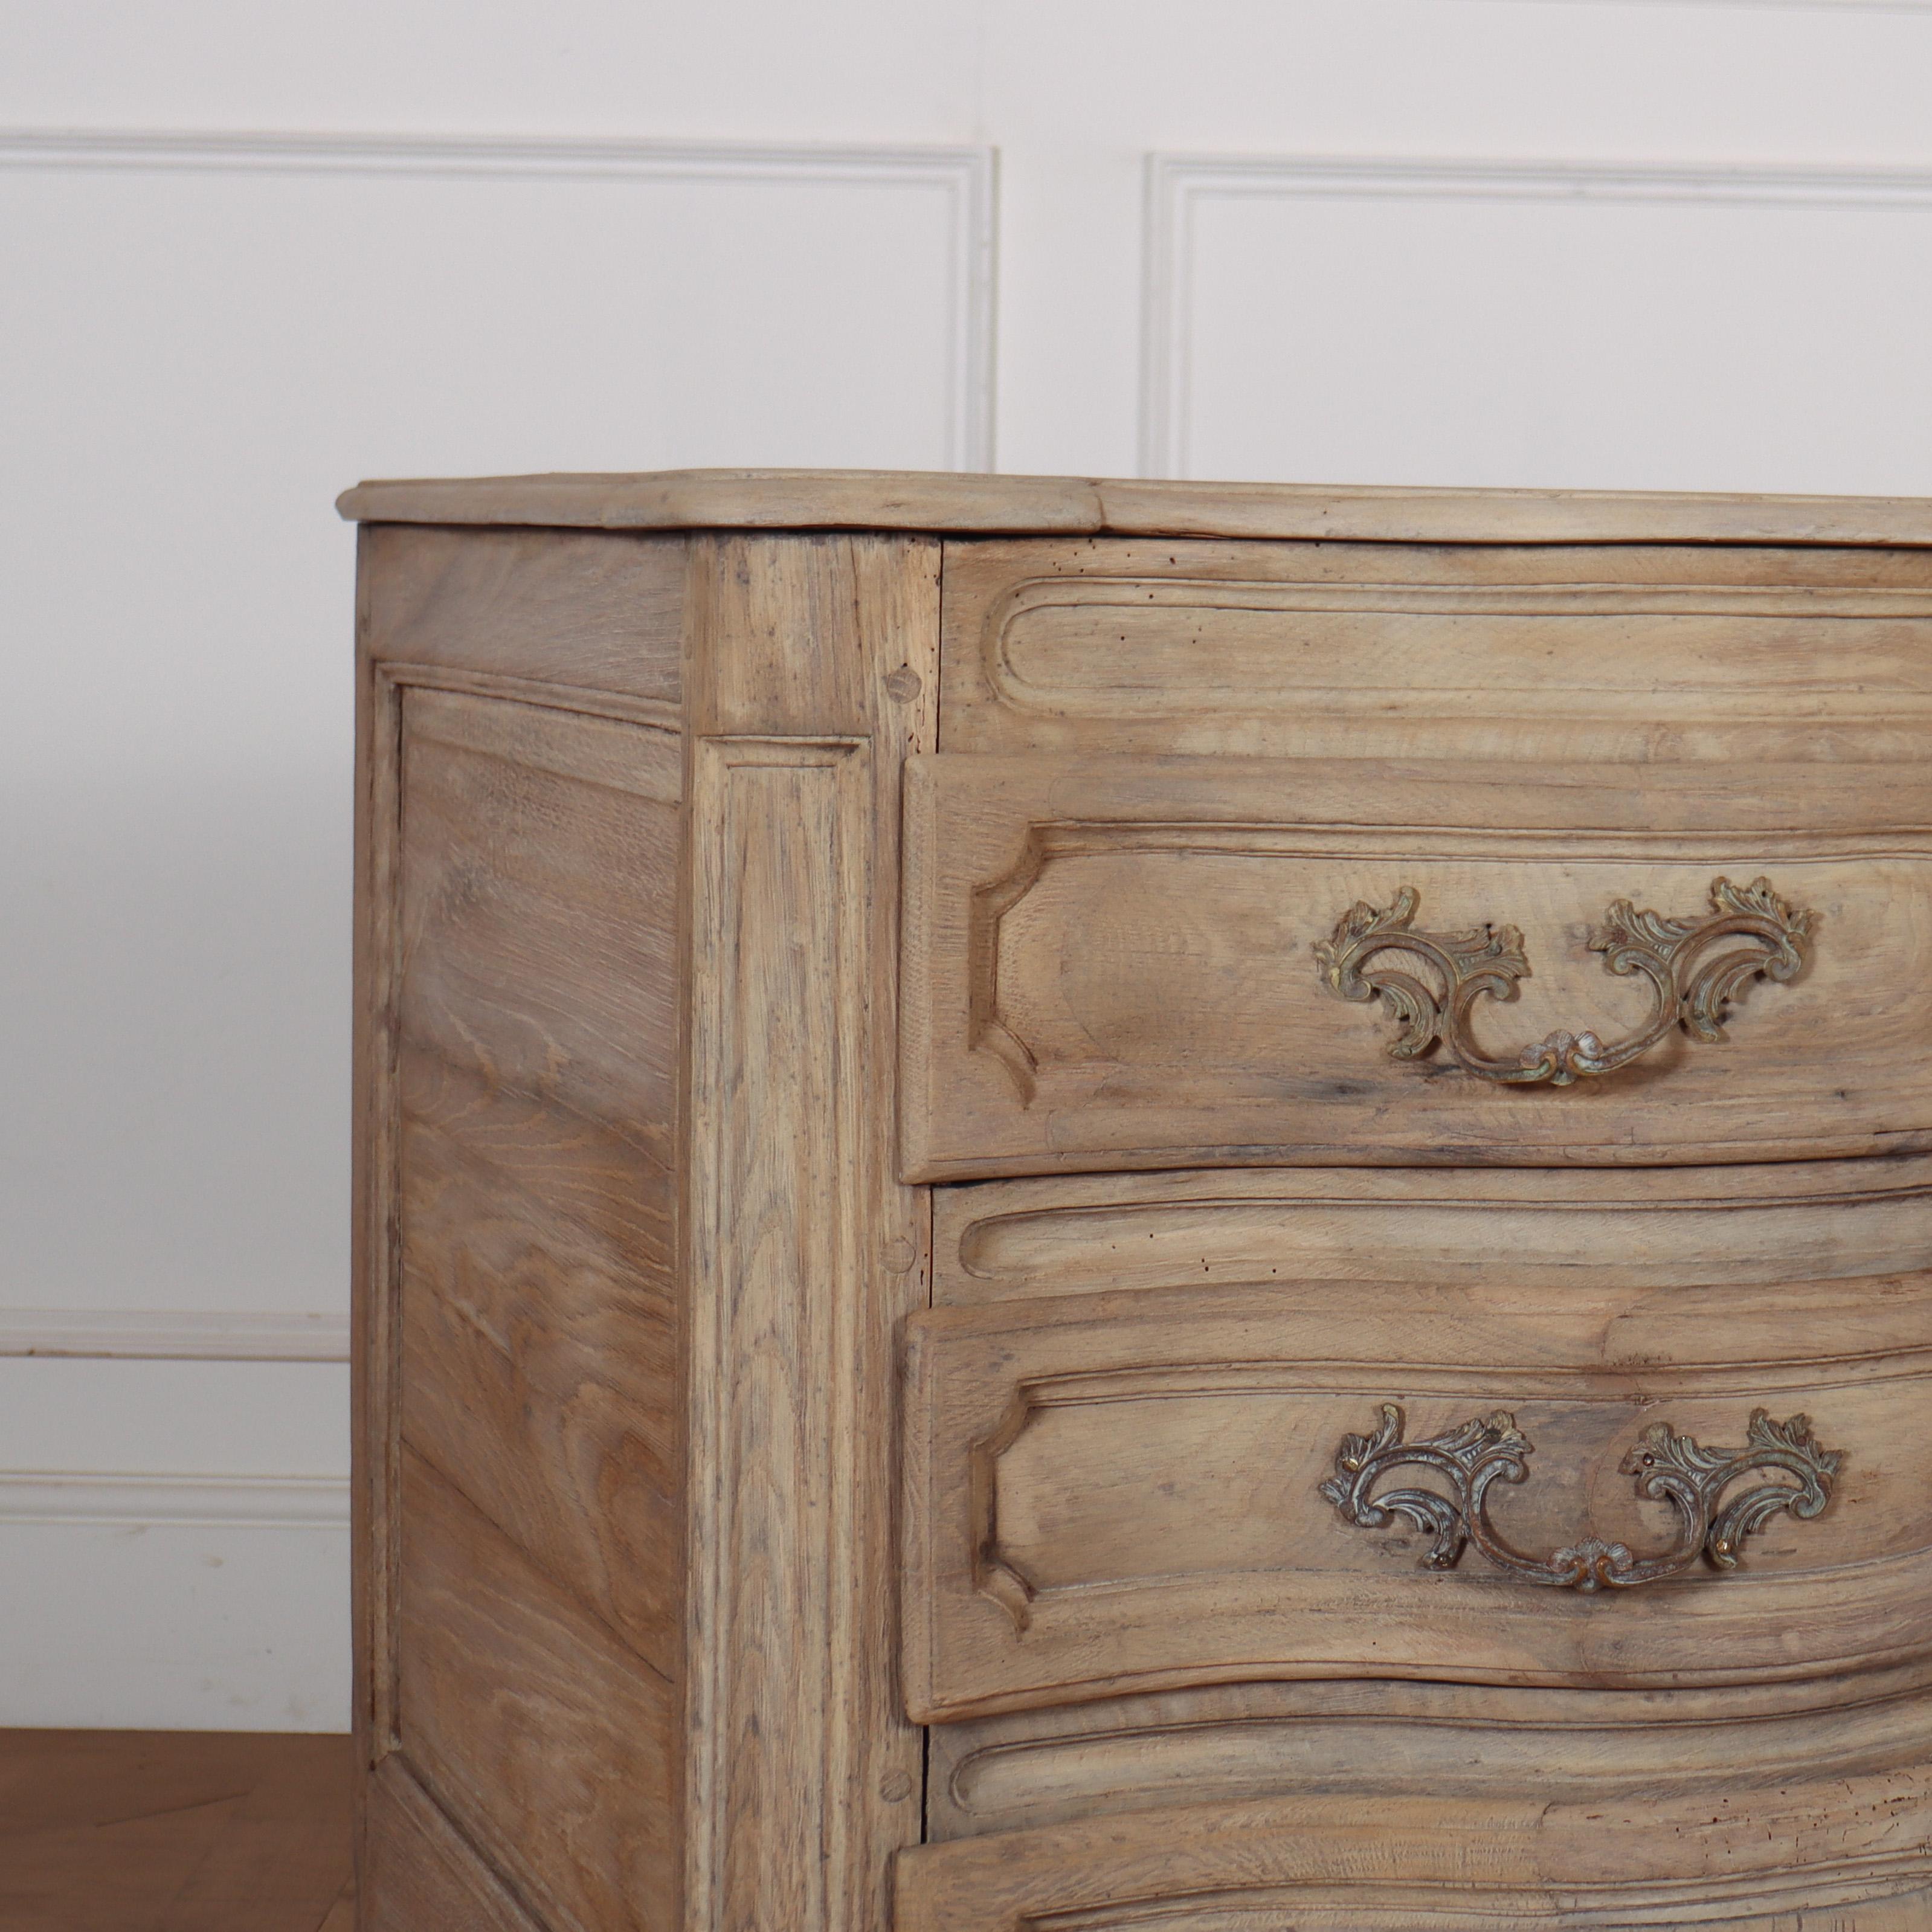 18th C French serpentine front bleached oak commode. 1770.

Reference: 7907

Dimensions
46 inches (117 cms) Wide
24.5 inches (62 cms) Deep
32 inches (81 cms) High